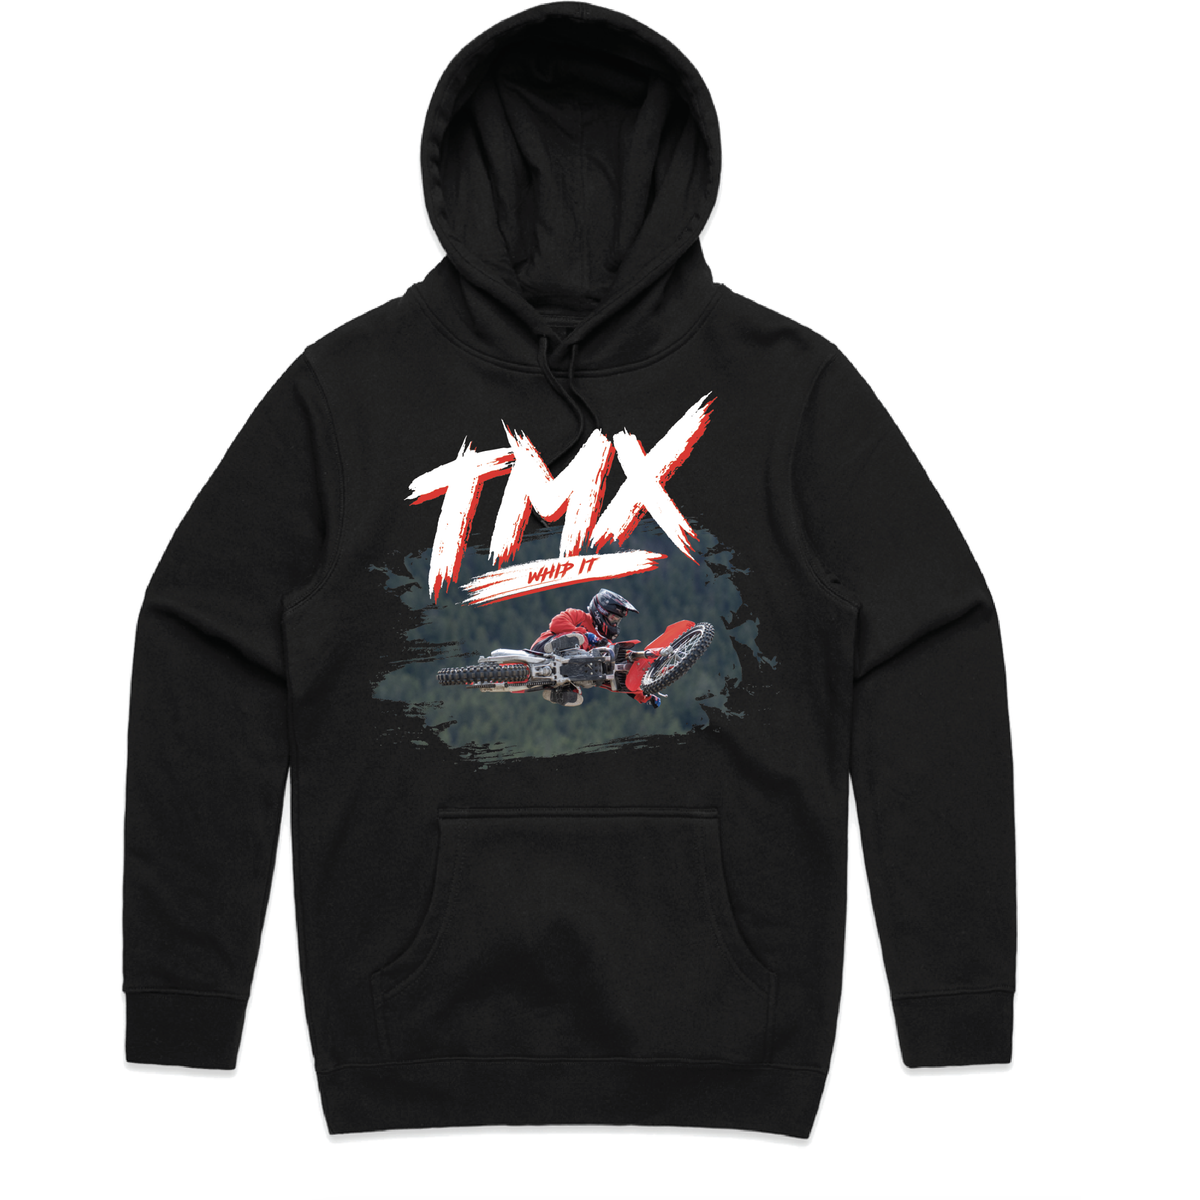 TMX-Men's-Knit-Hooded-Pullover-Whip-It - General - Synik Clothing - synikclothing.com